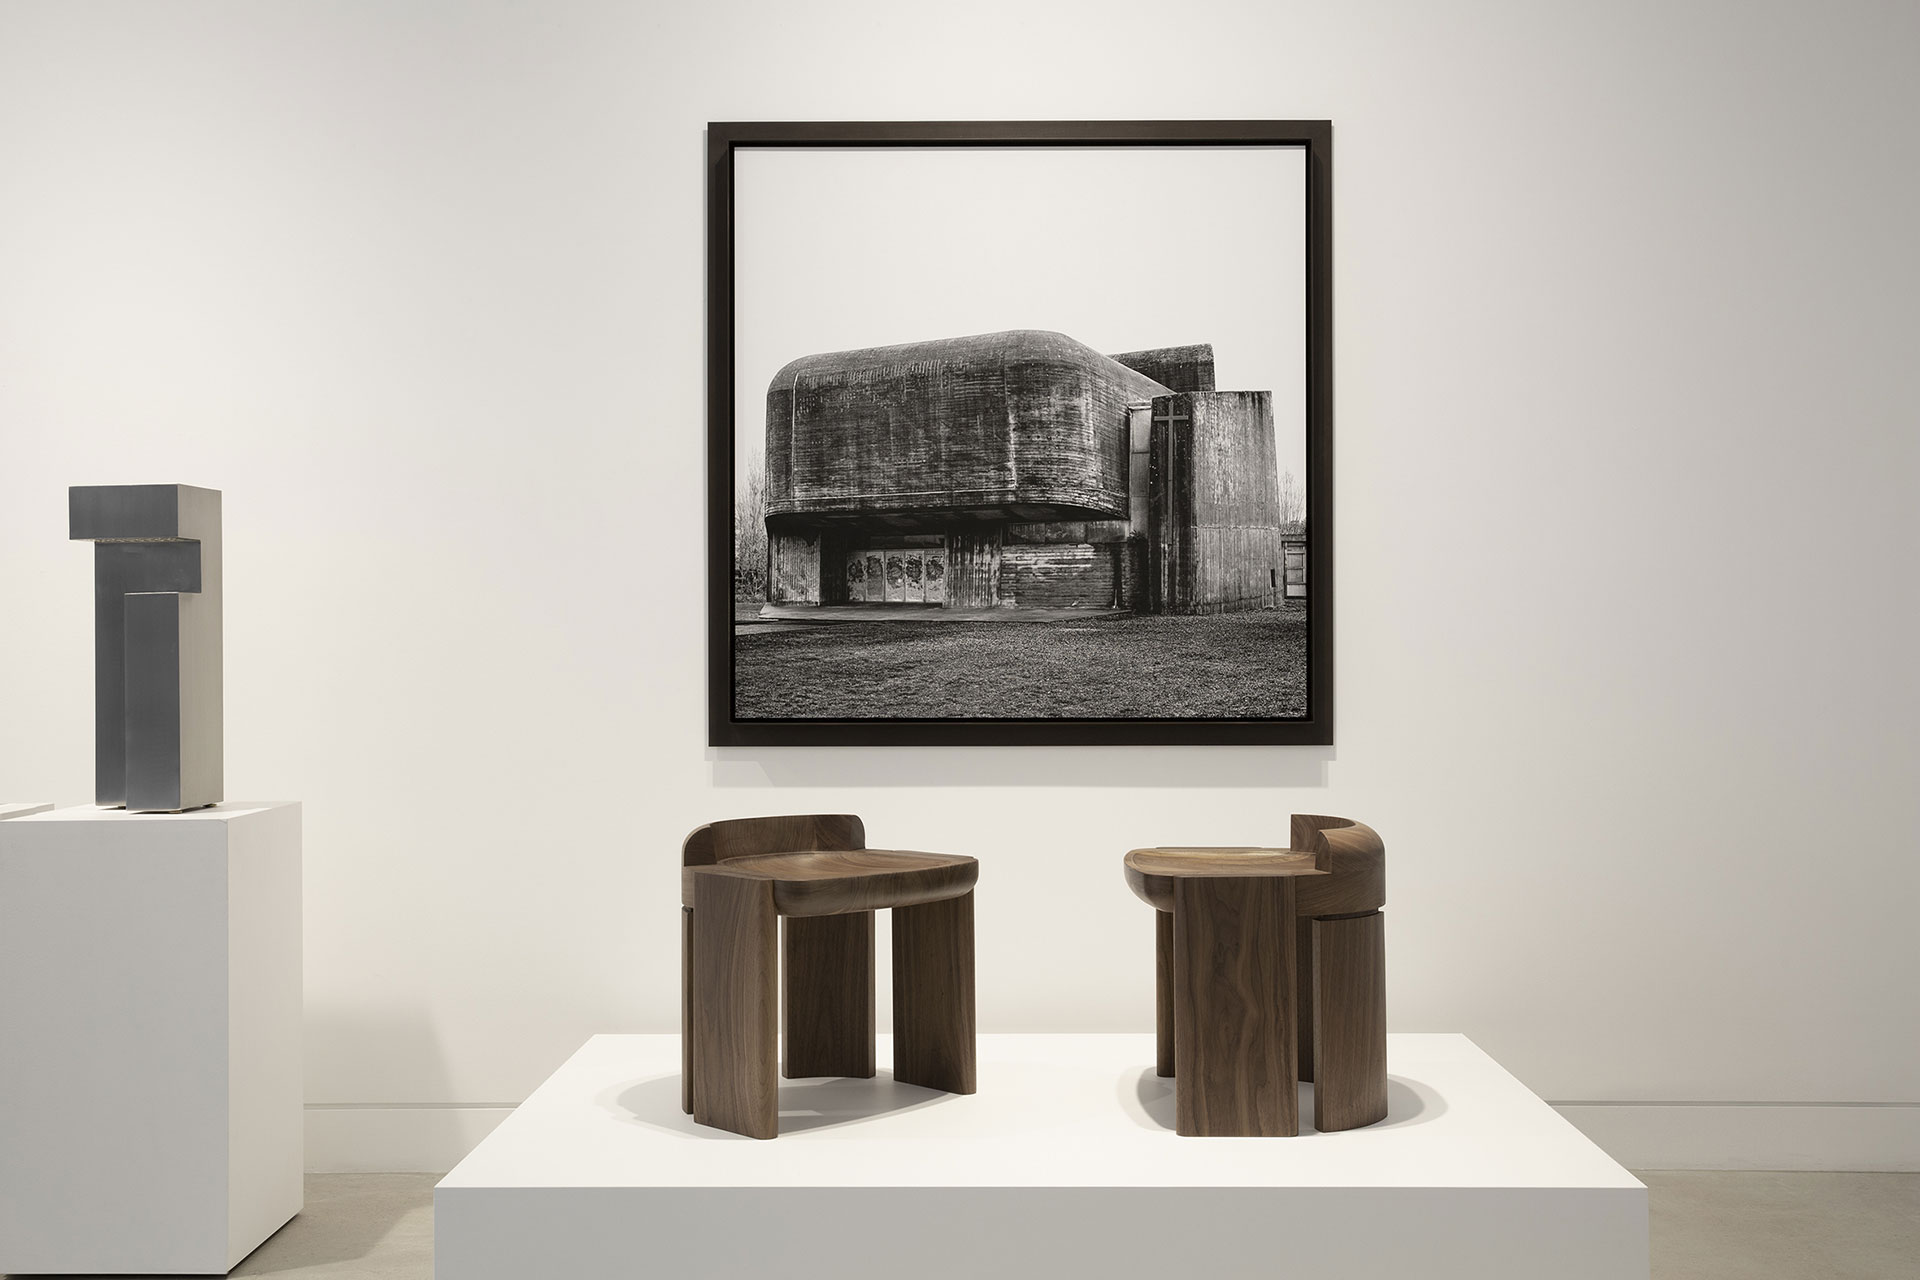 The Nevers stool is reminiscent of a church in Nevers